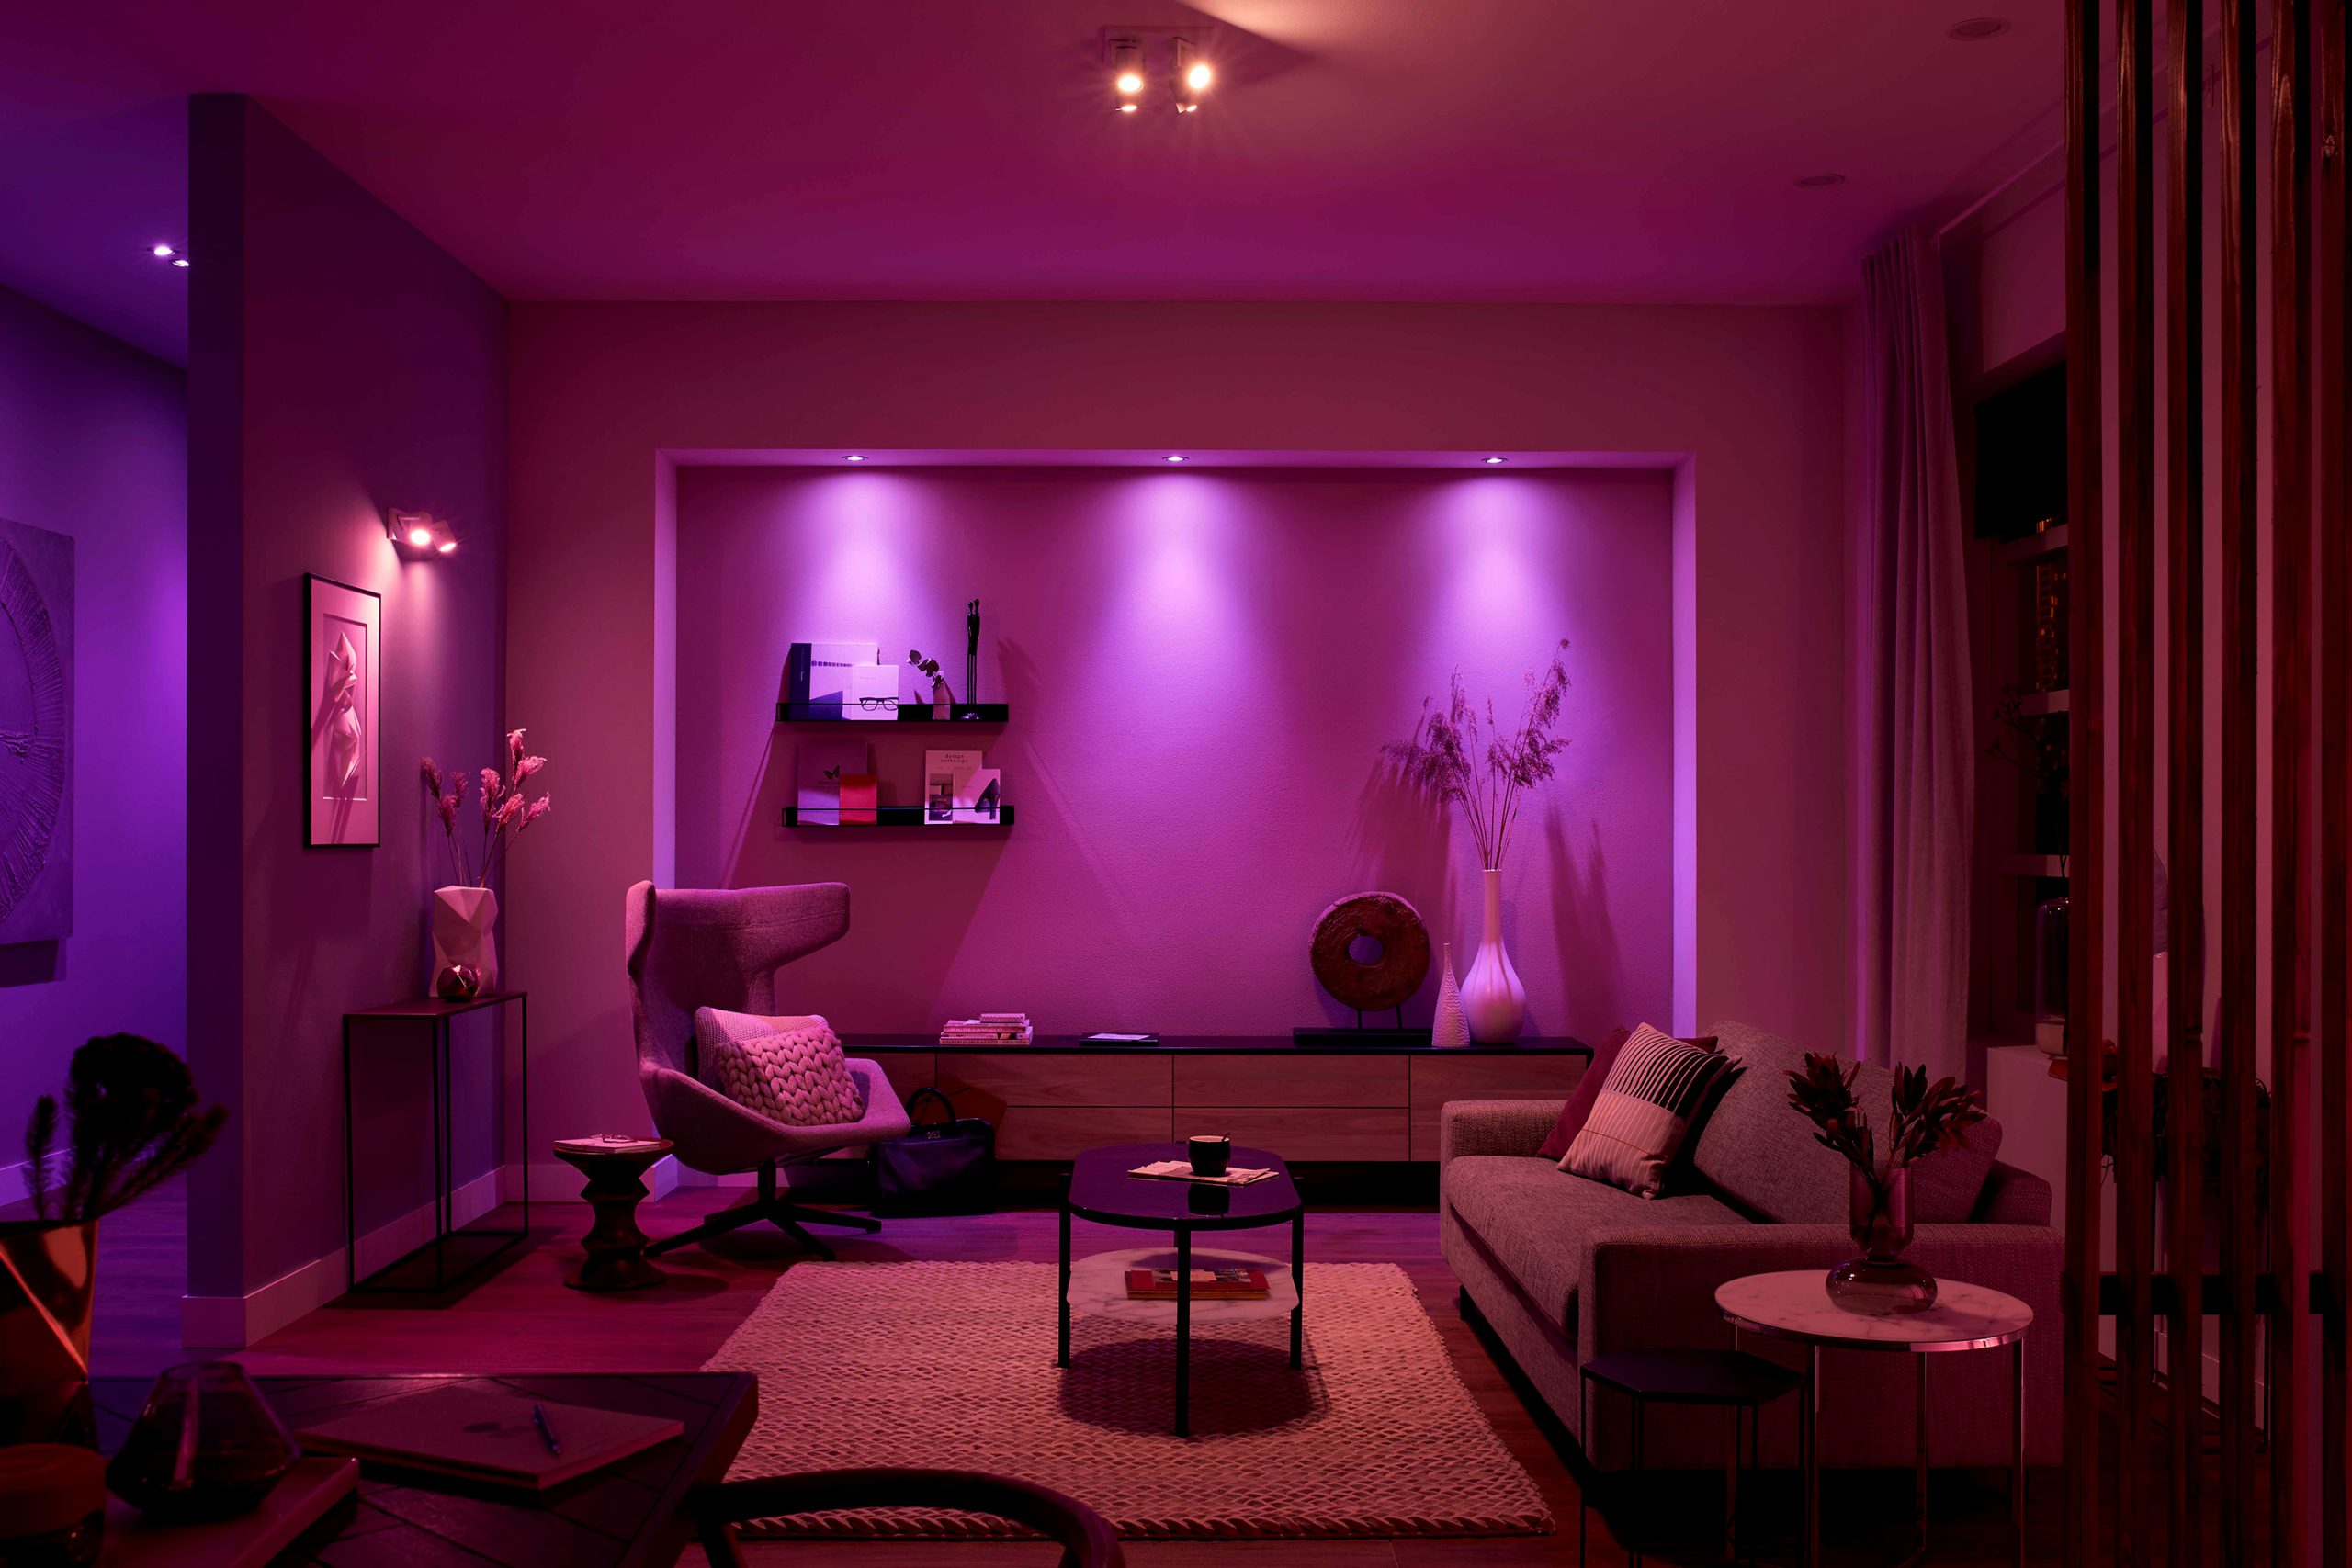 2022 LED Strip Ideas: Great Ideas To Do with Strips at home